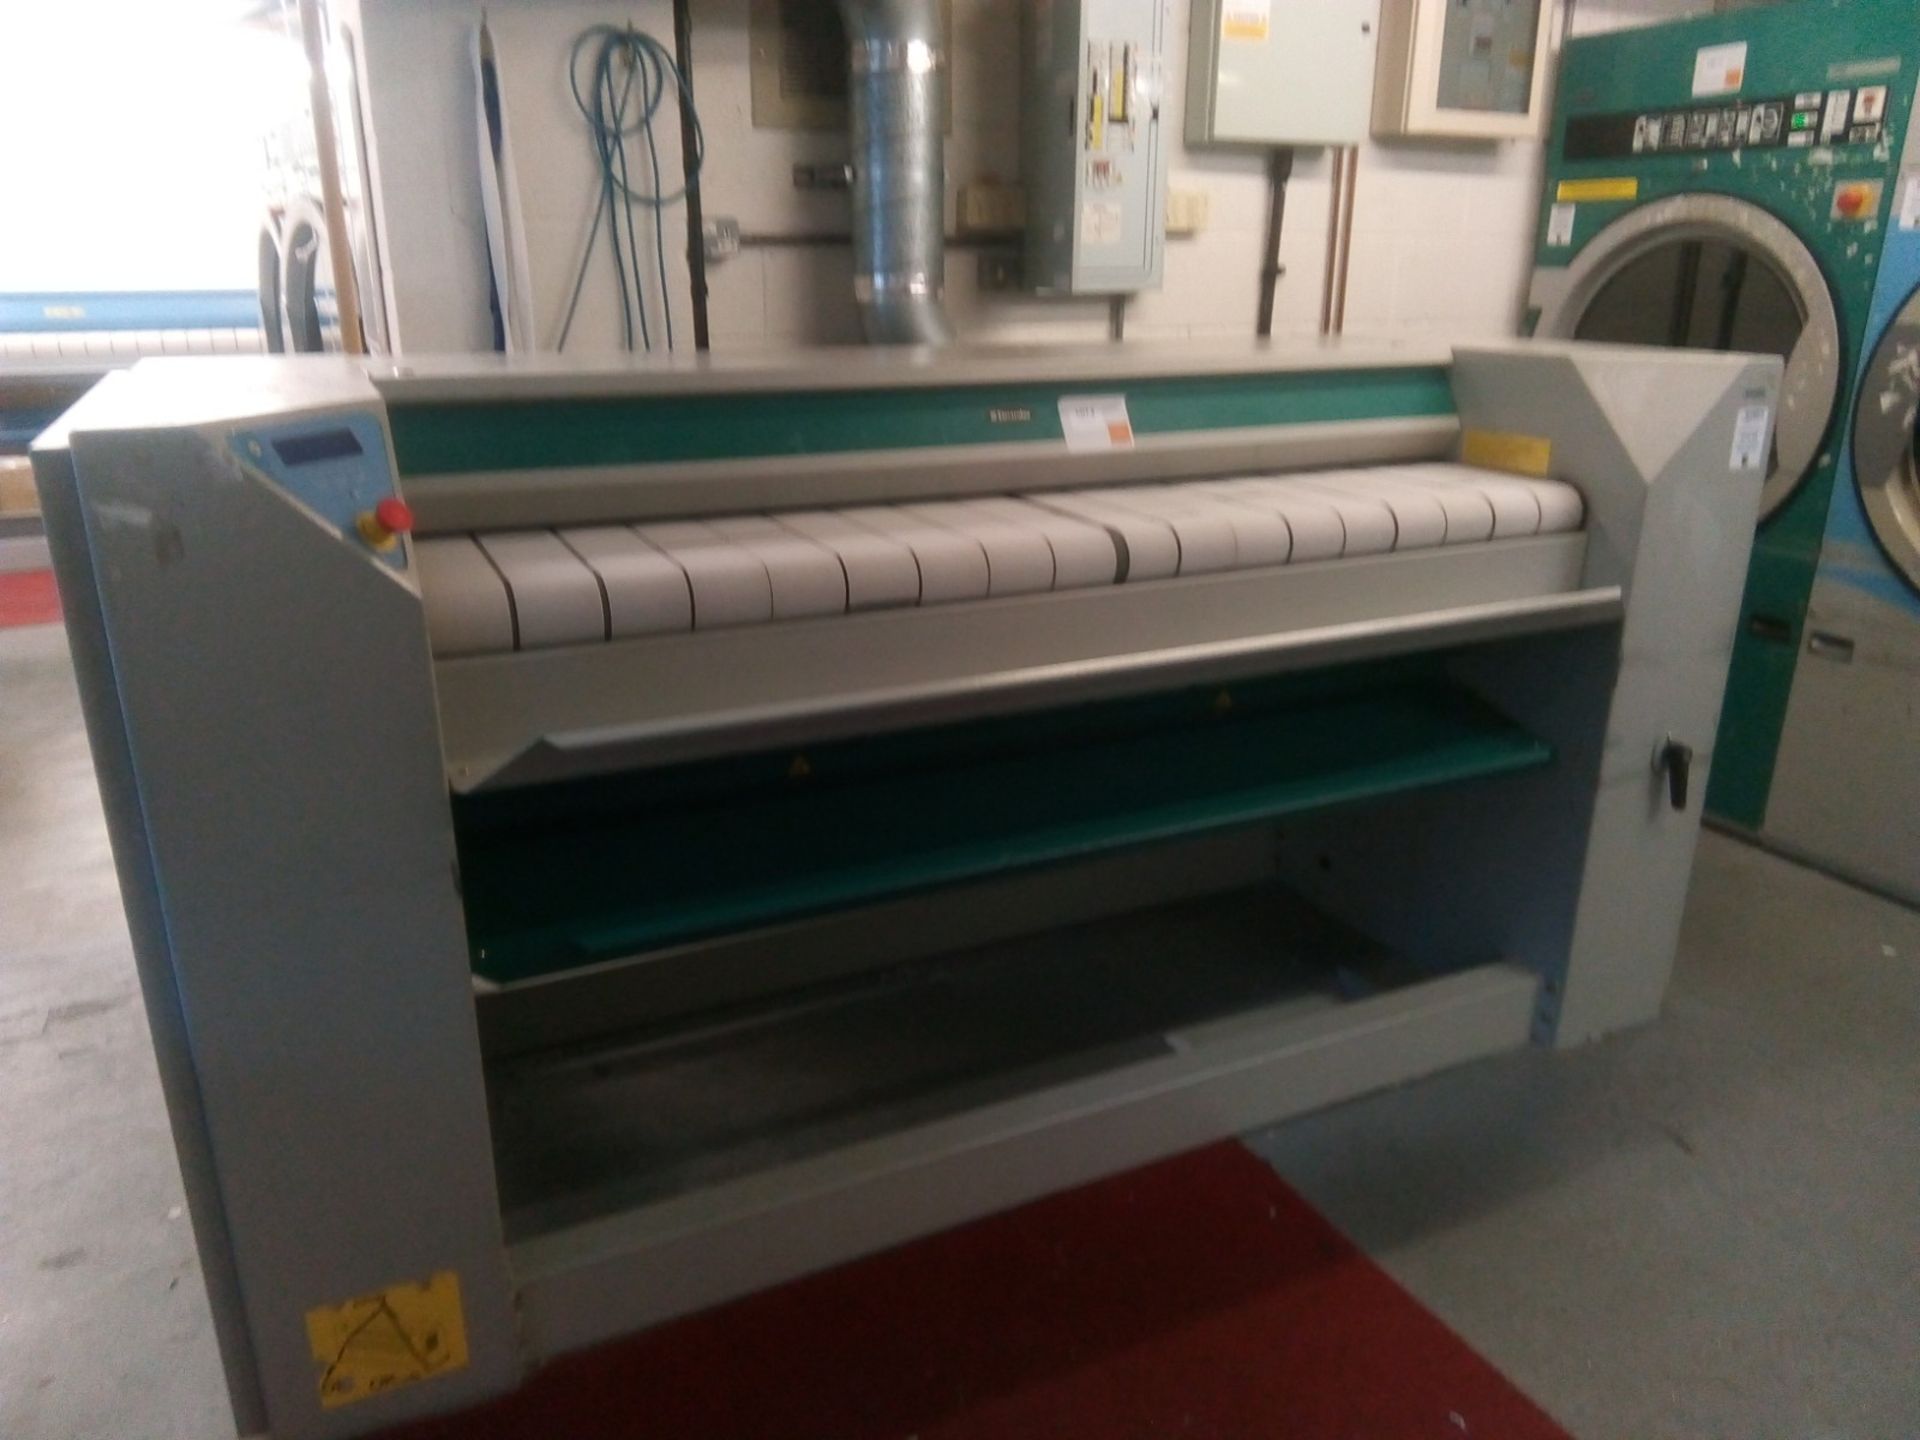 ELECTROLUX IC44819 industrial cylinder ironer with electric feeder. Cylinder length 1.9m. Serial no.